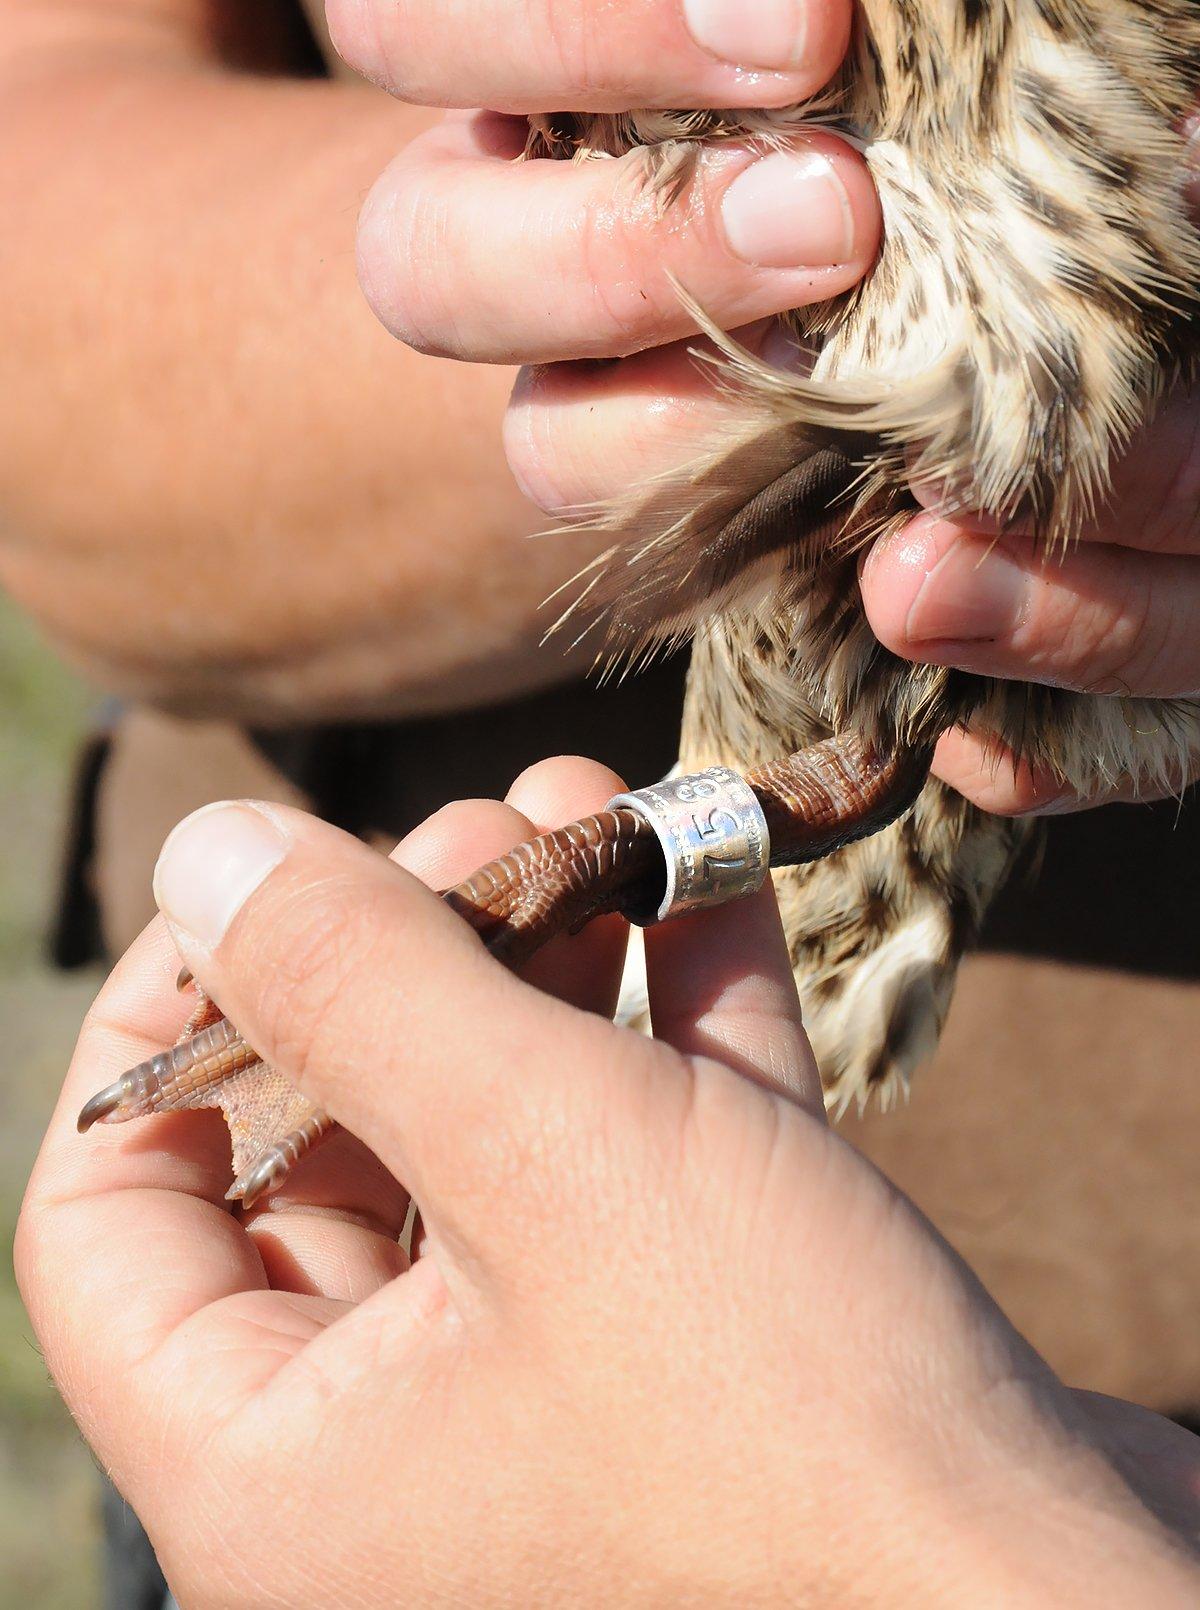 Helping with state or federal waterfowl banding efforts is just one way to make a difference betweeen duck seasons. Photo courtesy of Ducks Unlimited.